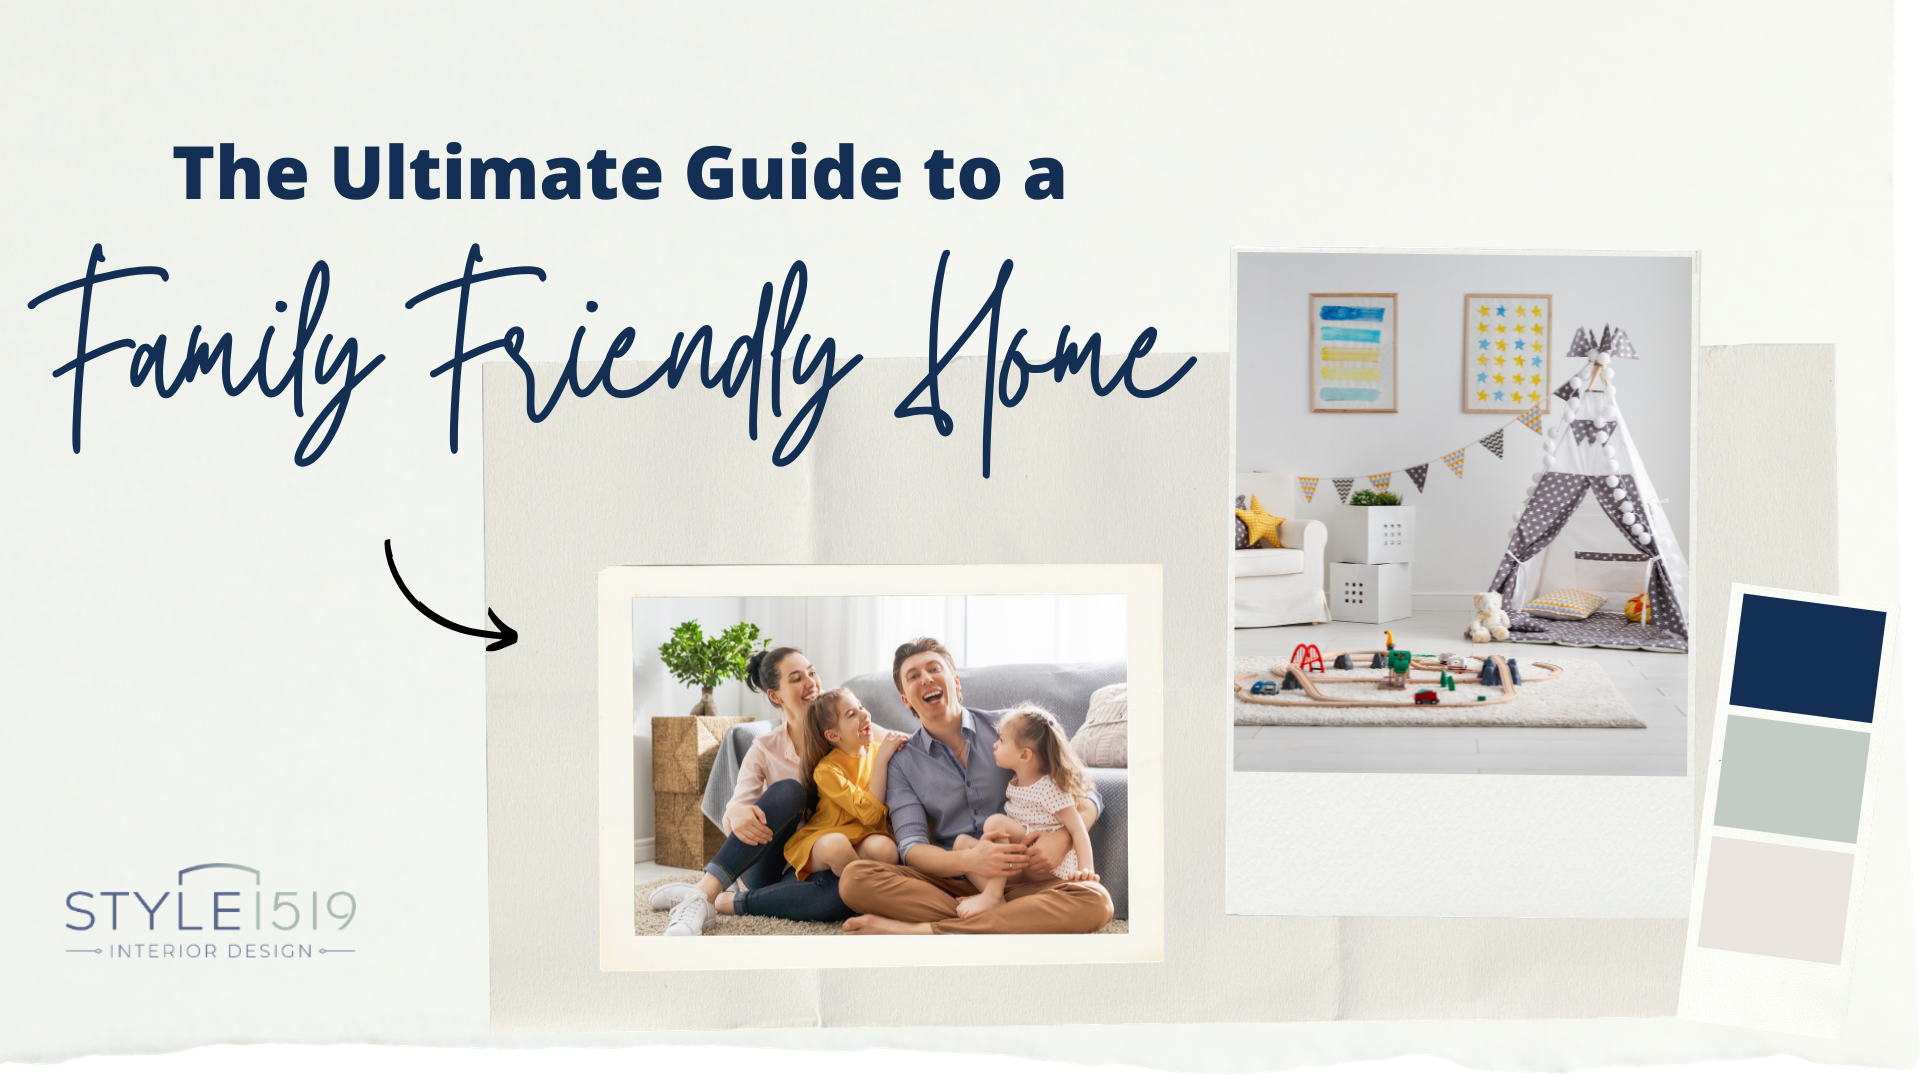 The Ultimate Guide to a Family Friendly Home by Style 1519